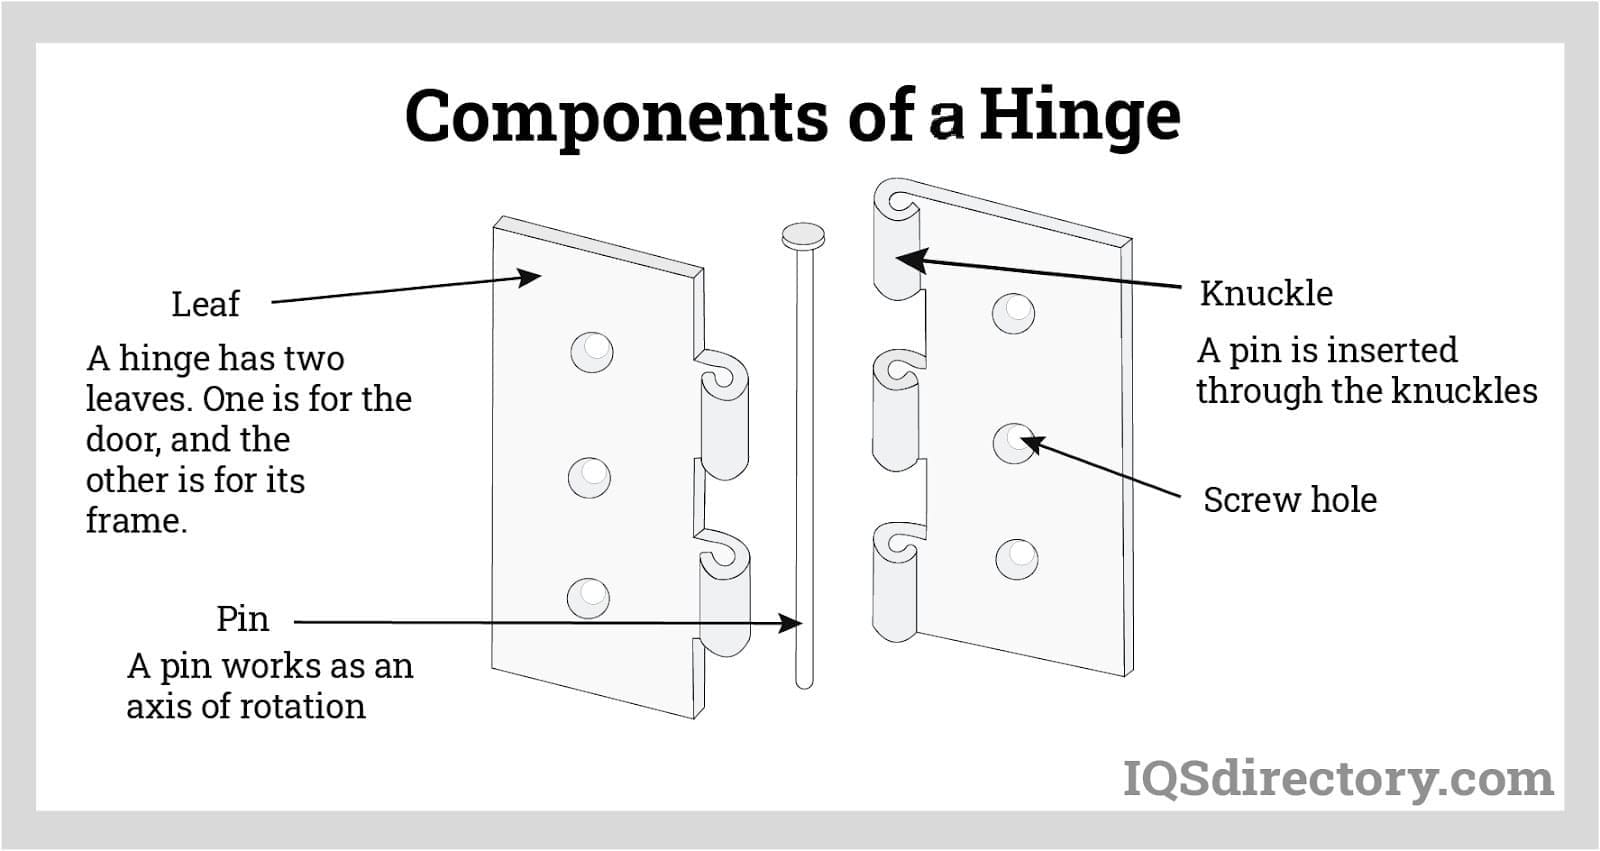 Components of a Hinge